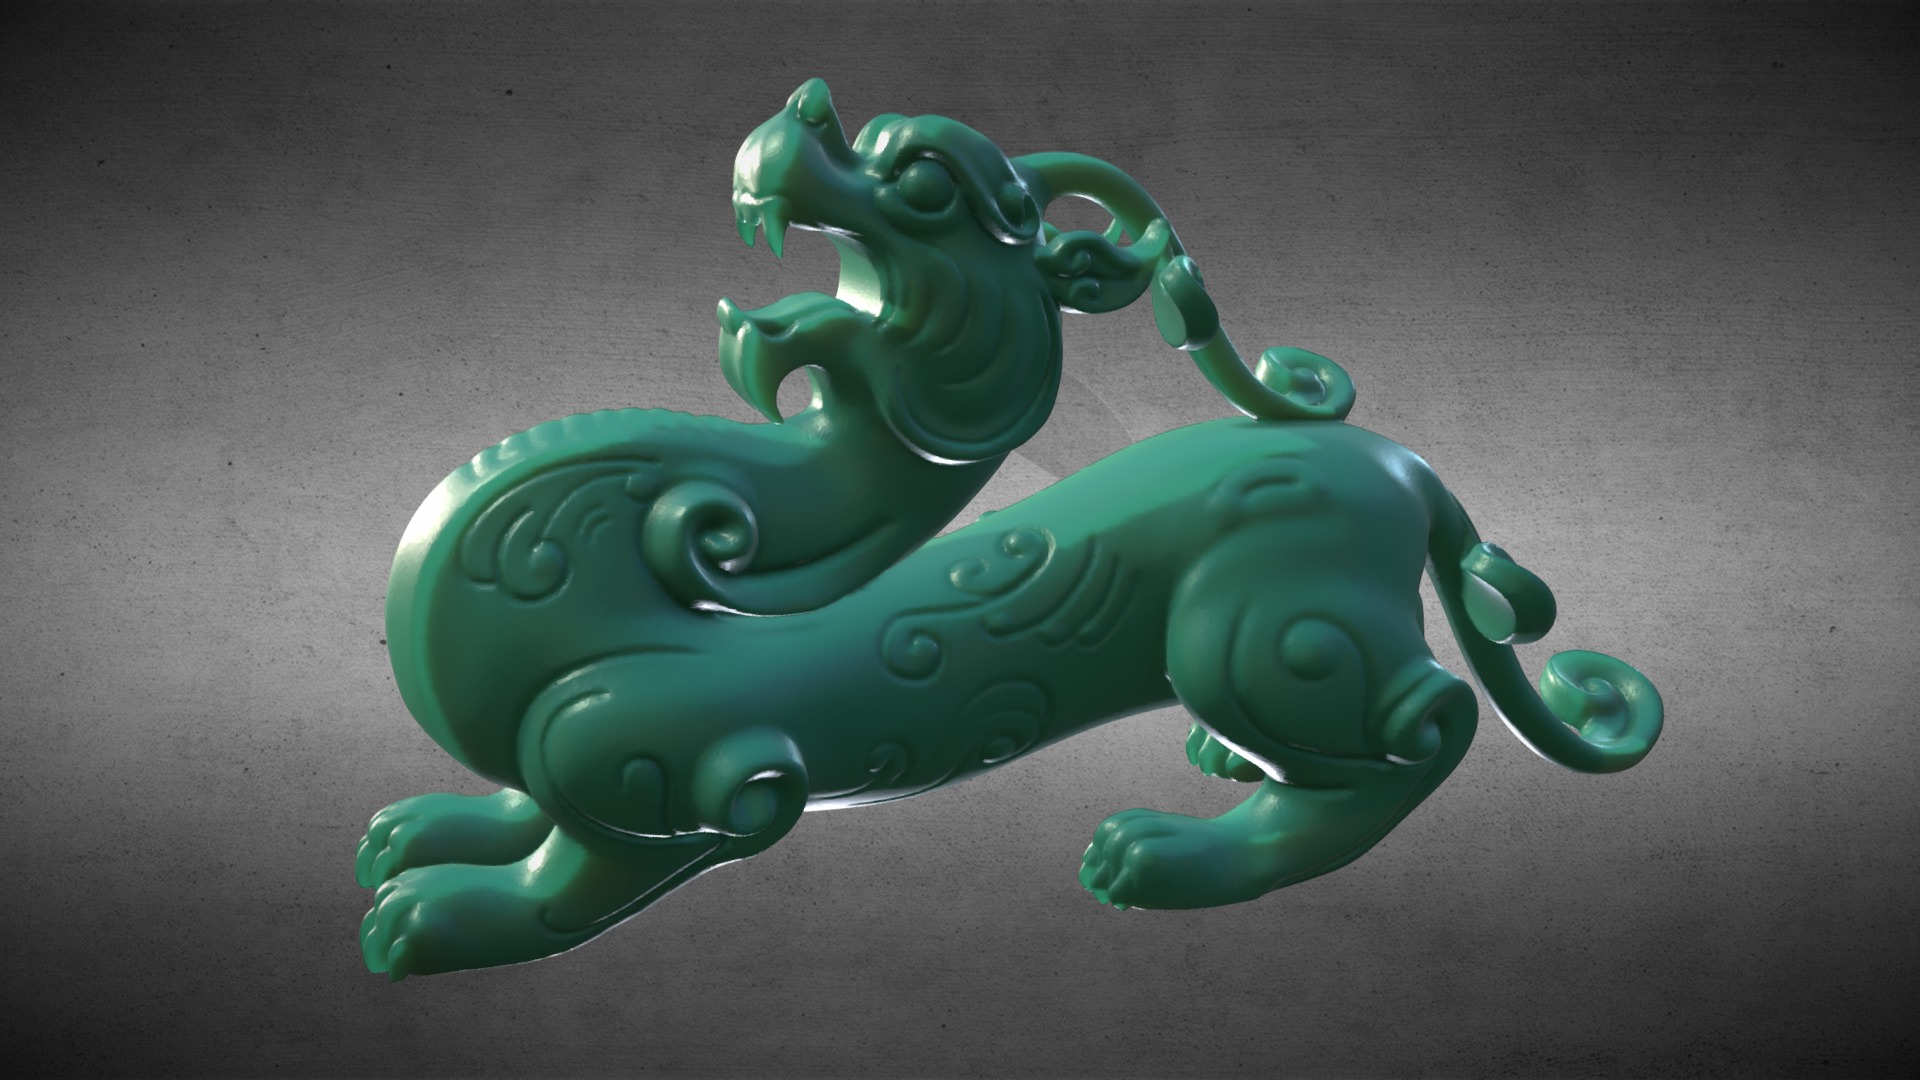 3D model Pi Xiu - This is a 3D model of the Pi Xiu. The 3D model is about a green toy dinosaur.